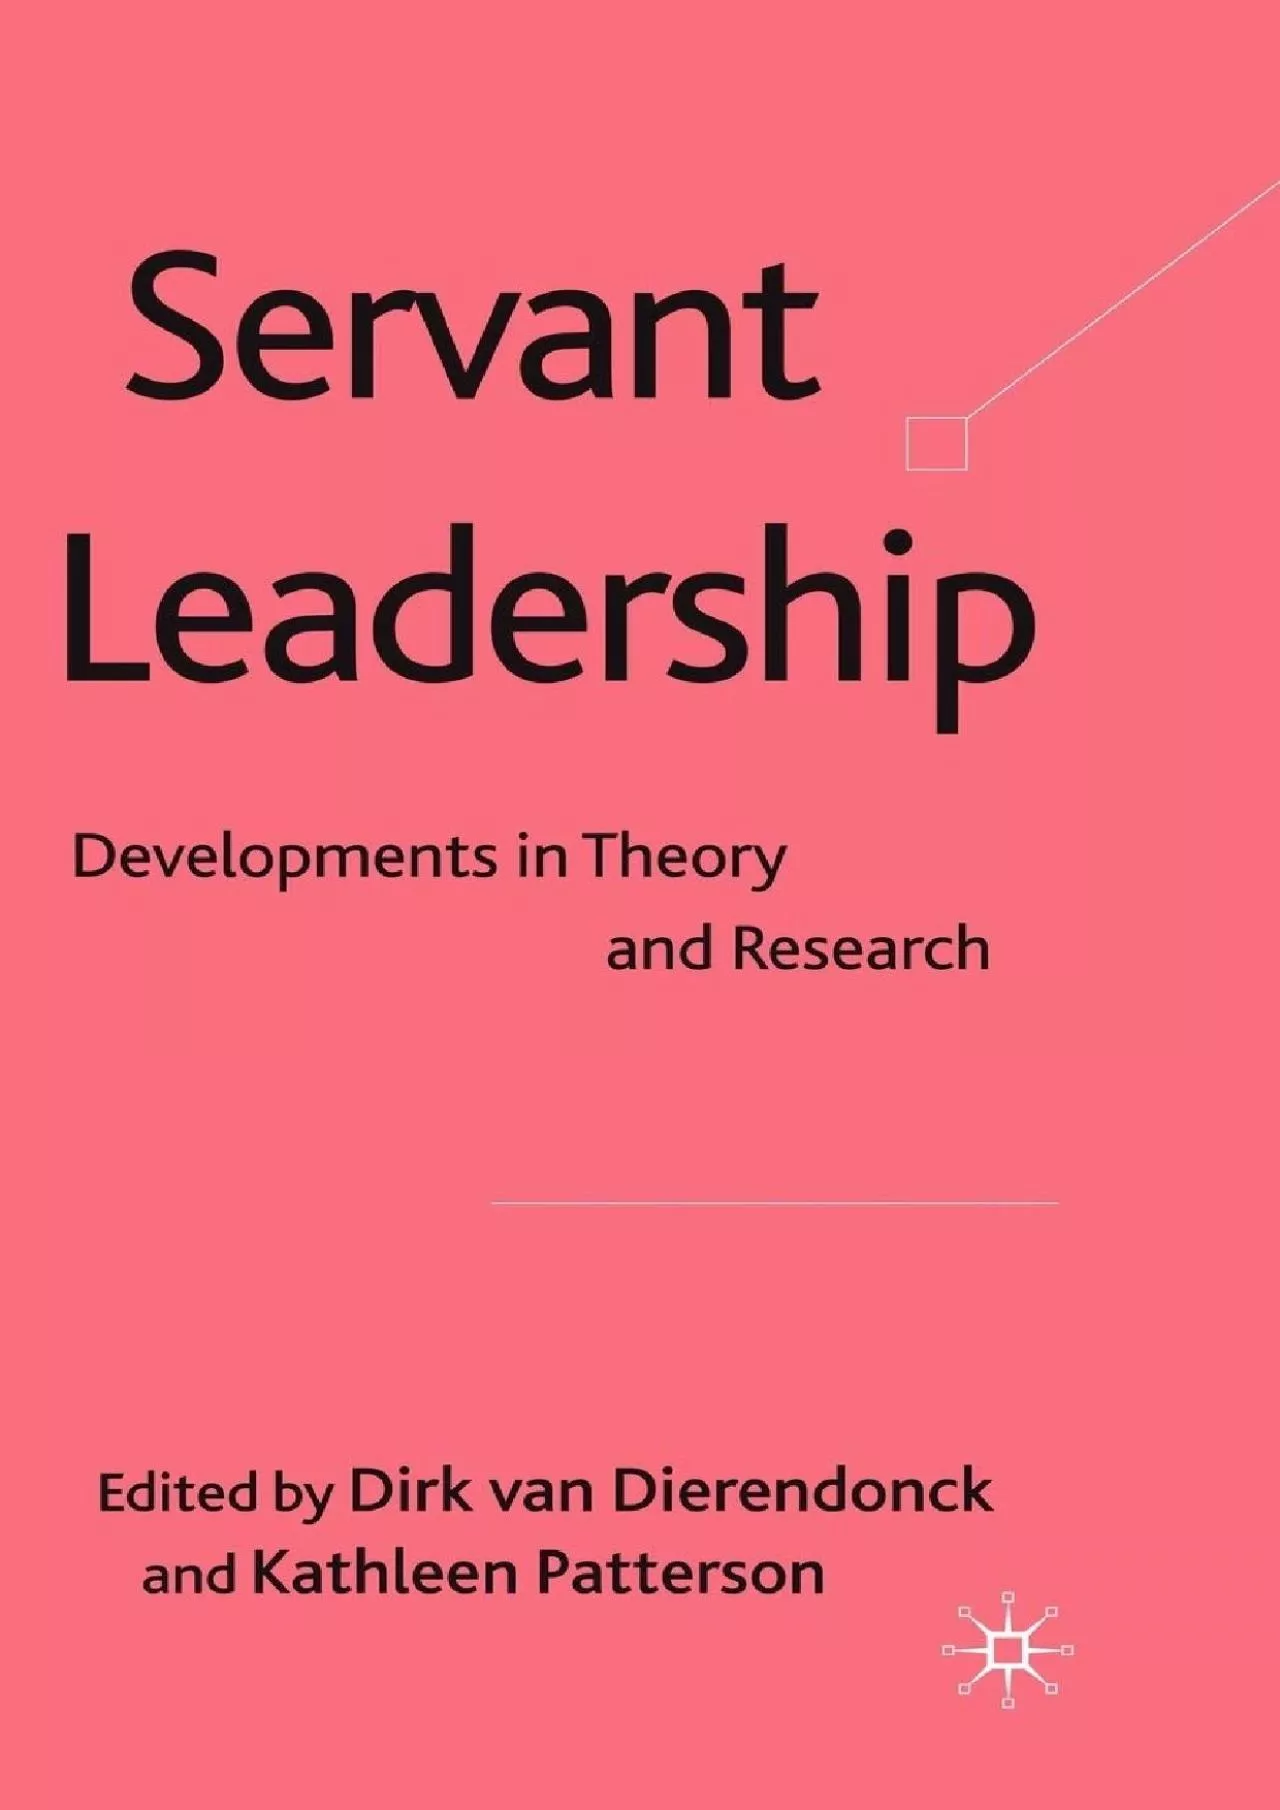 (BOOK)-Servant Leadership: Developments in Theory and Research